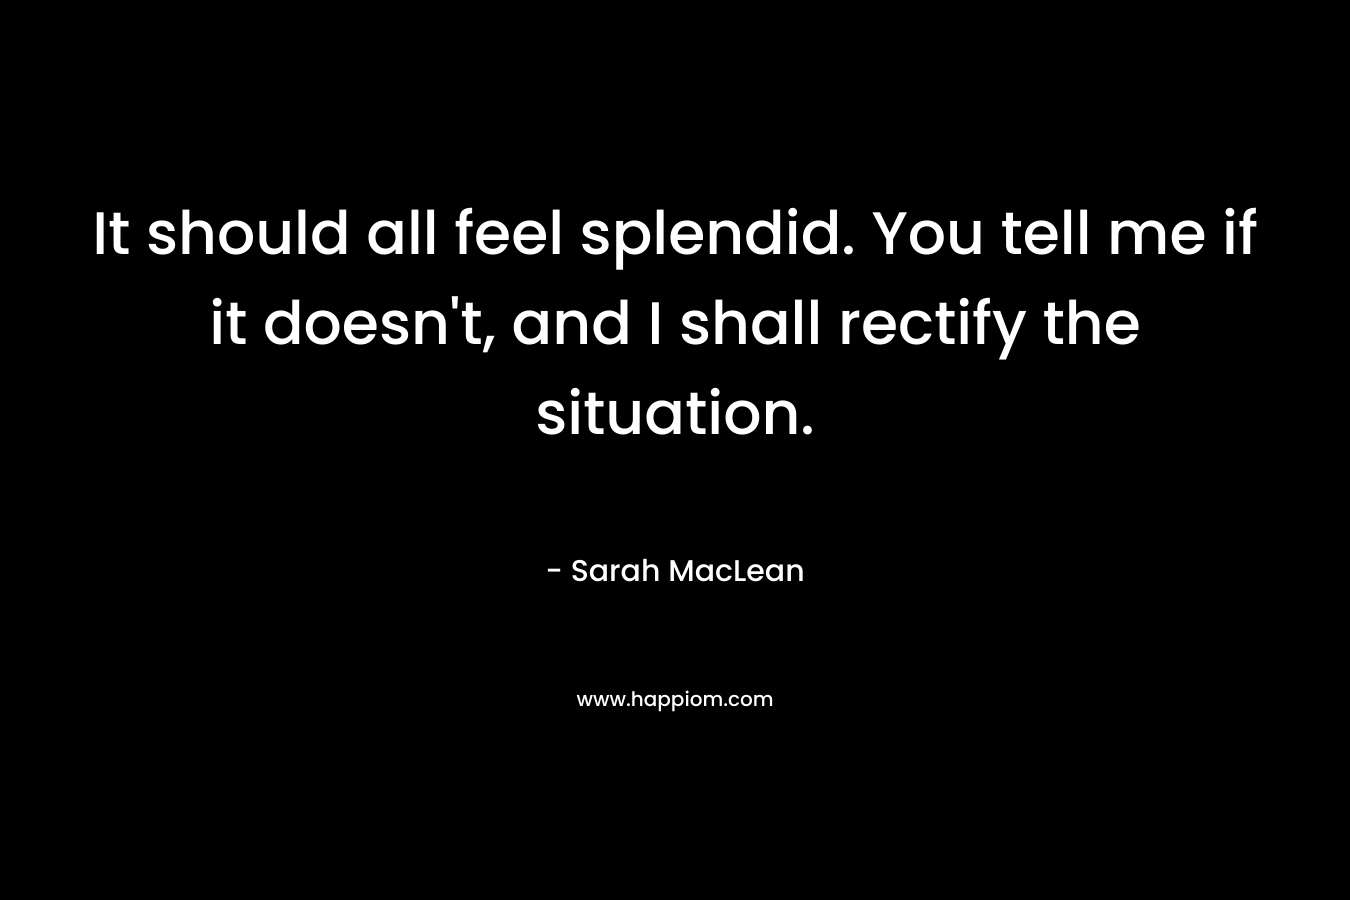 It should all feel splendid. You tell me if it doesn’t, and I shall rectify the situation. – Sarah MacLean